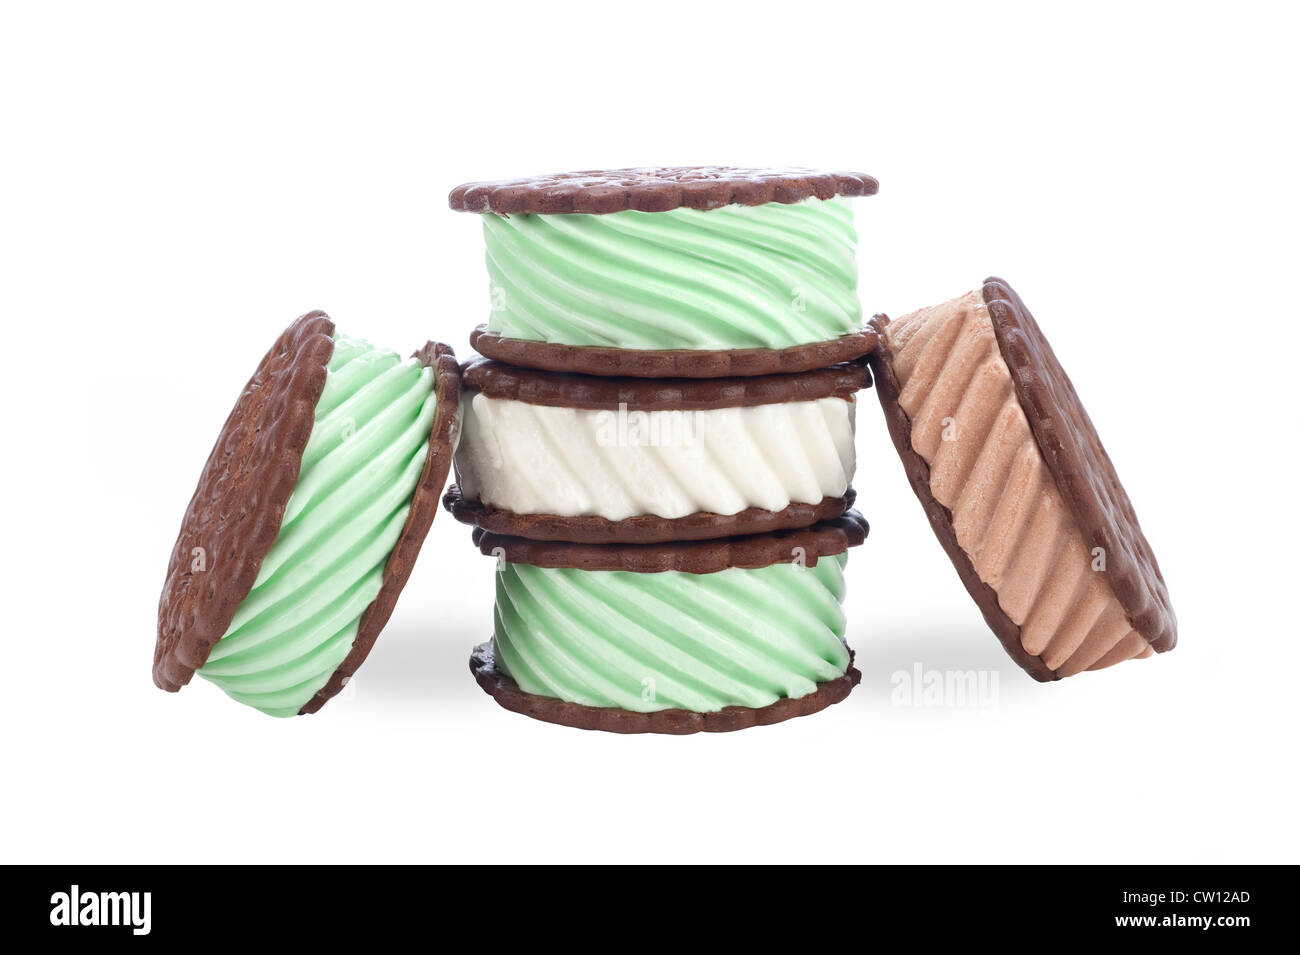 A collection of chocolate, vanilla and mint ice cream sandwiches on a white background. Stock Photo